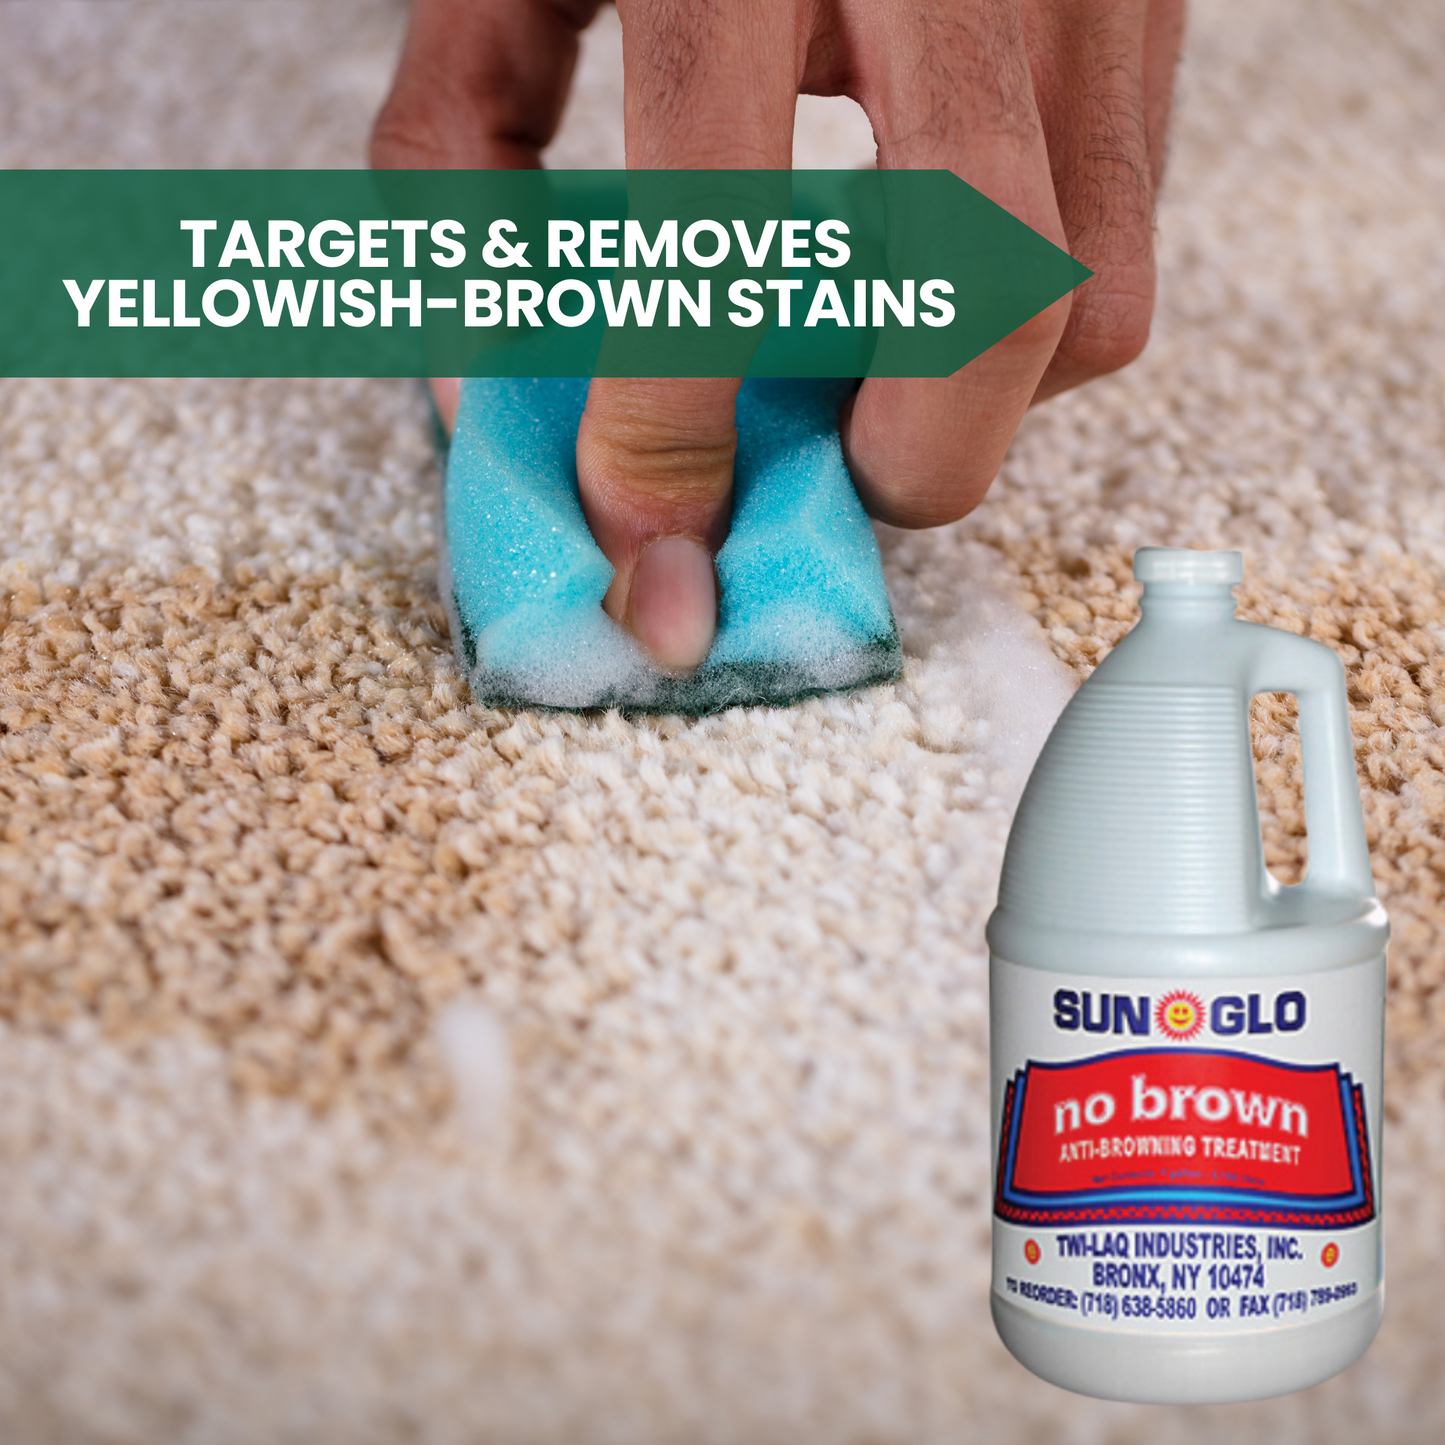 SUN GLO No Brown - Anti-Browning Treatment Carpet Stain Remover and Cleaner Solution, for Fresh and Vibrant Carpets (4x1 Gallon Case)